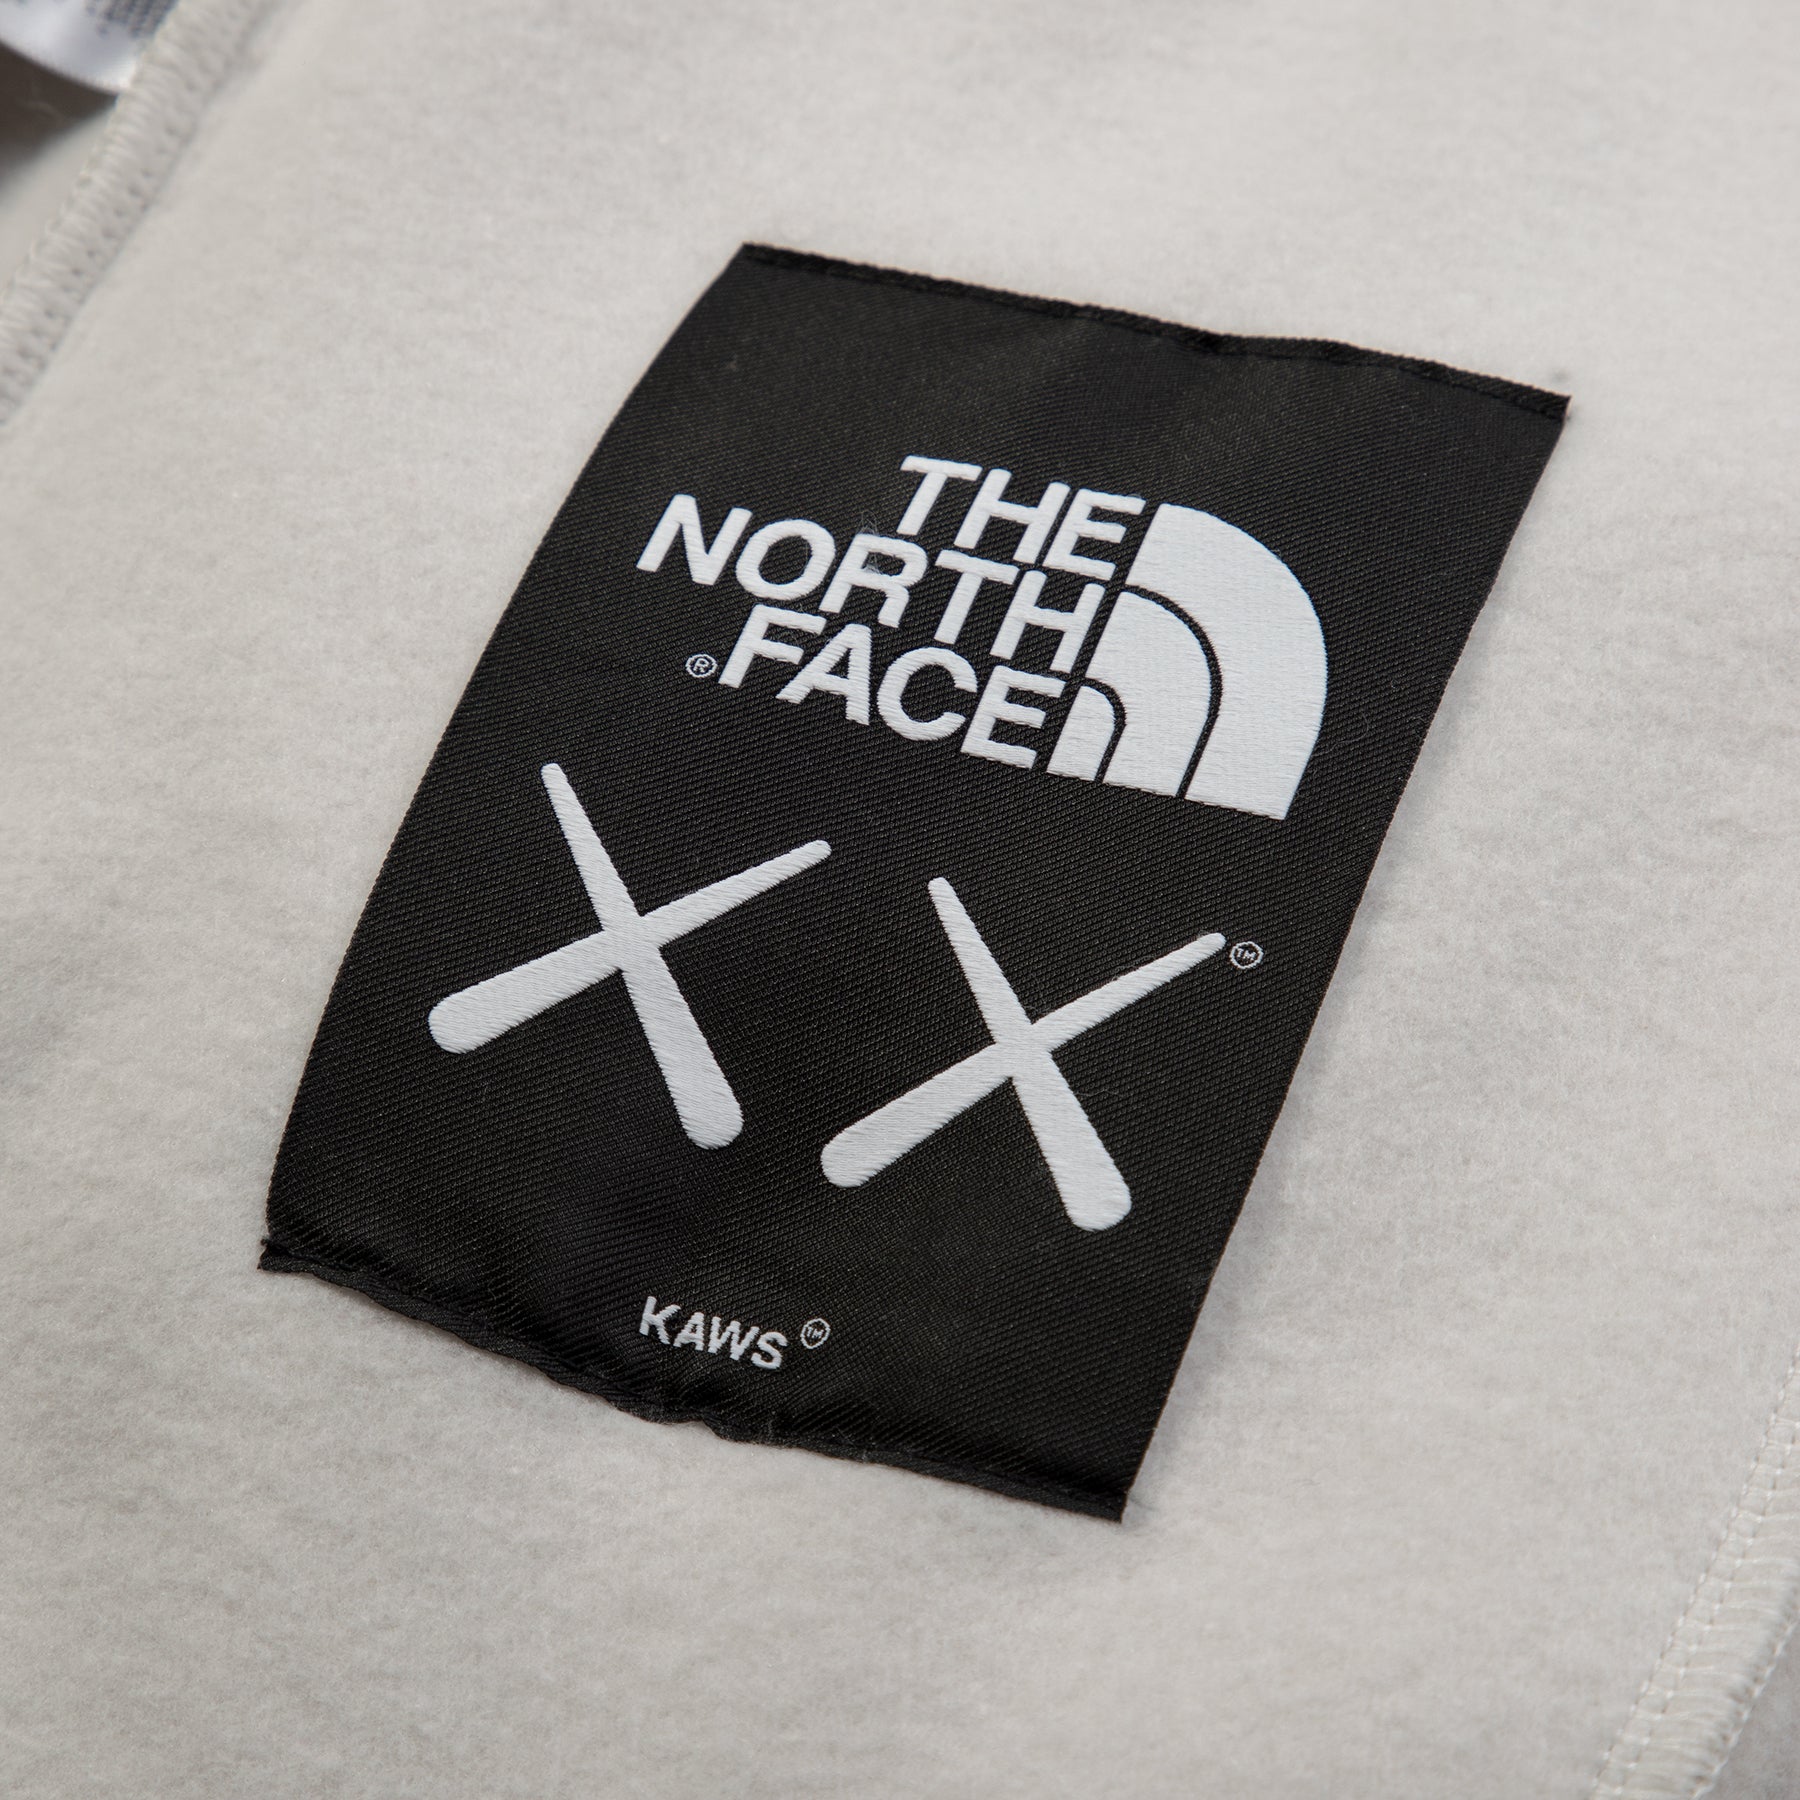 Calamiteit logboek schaal The North Face x KAWS Sweatpant (Moonlight Ivory) – Concepts